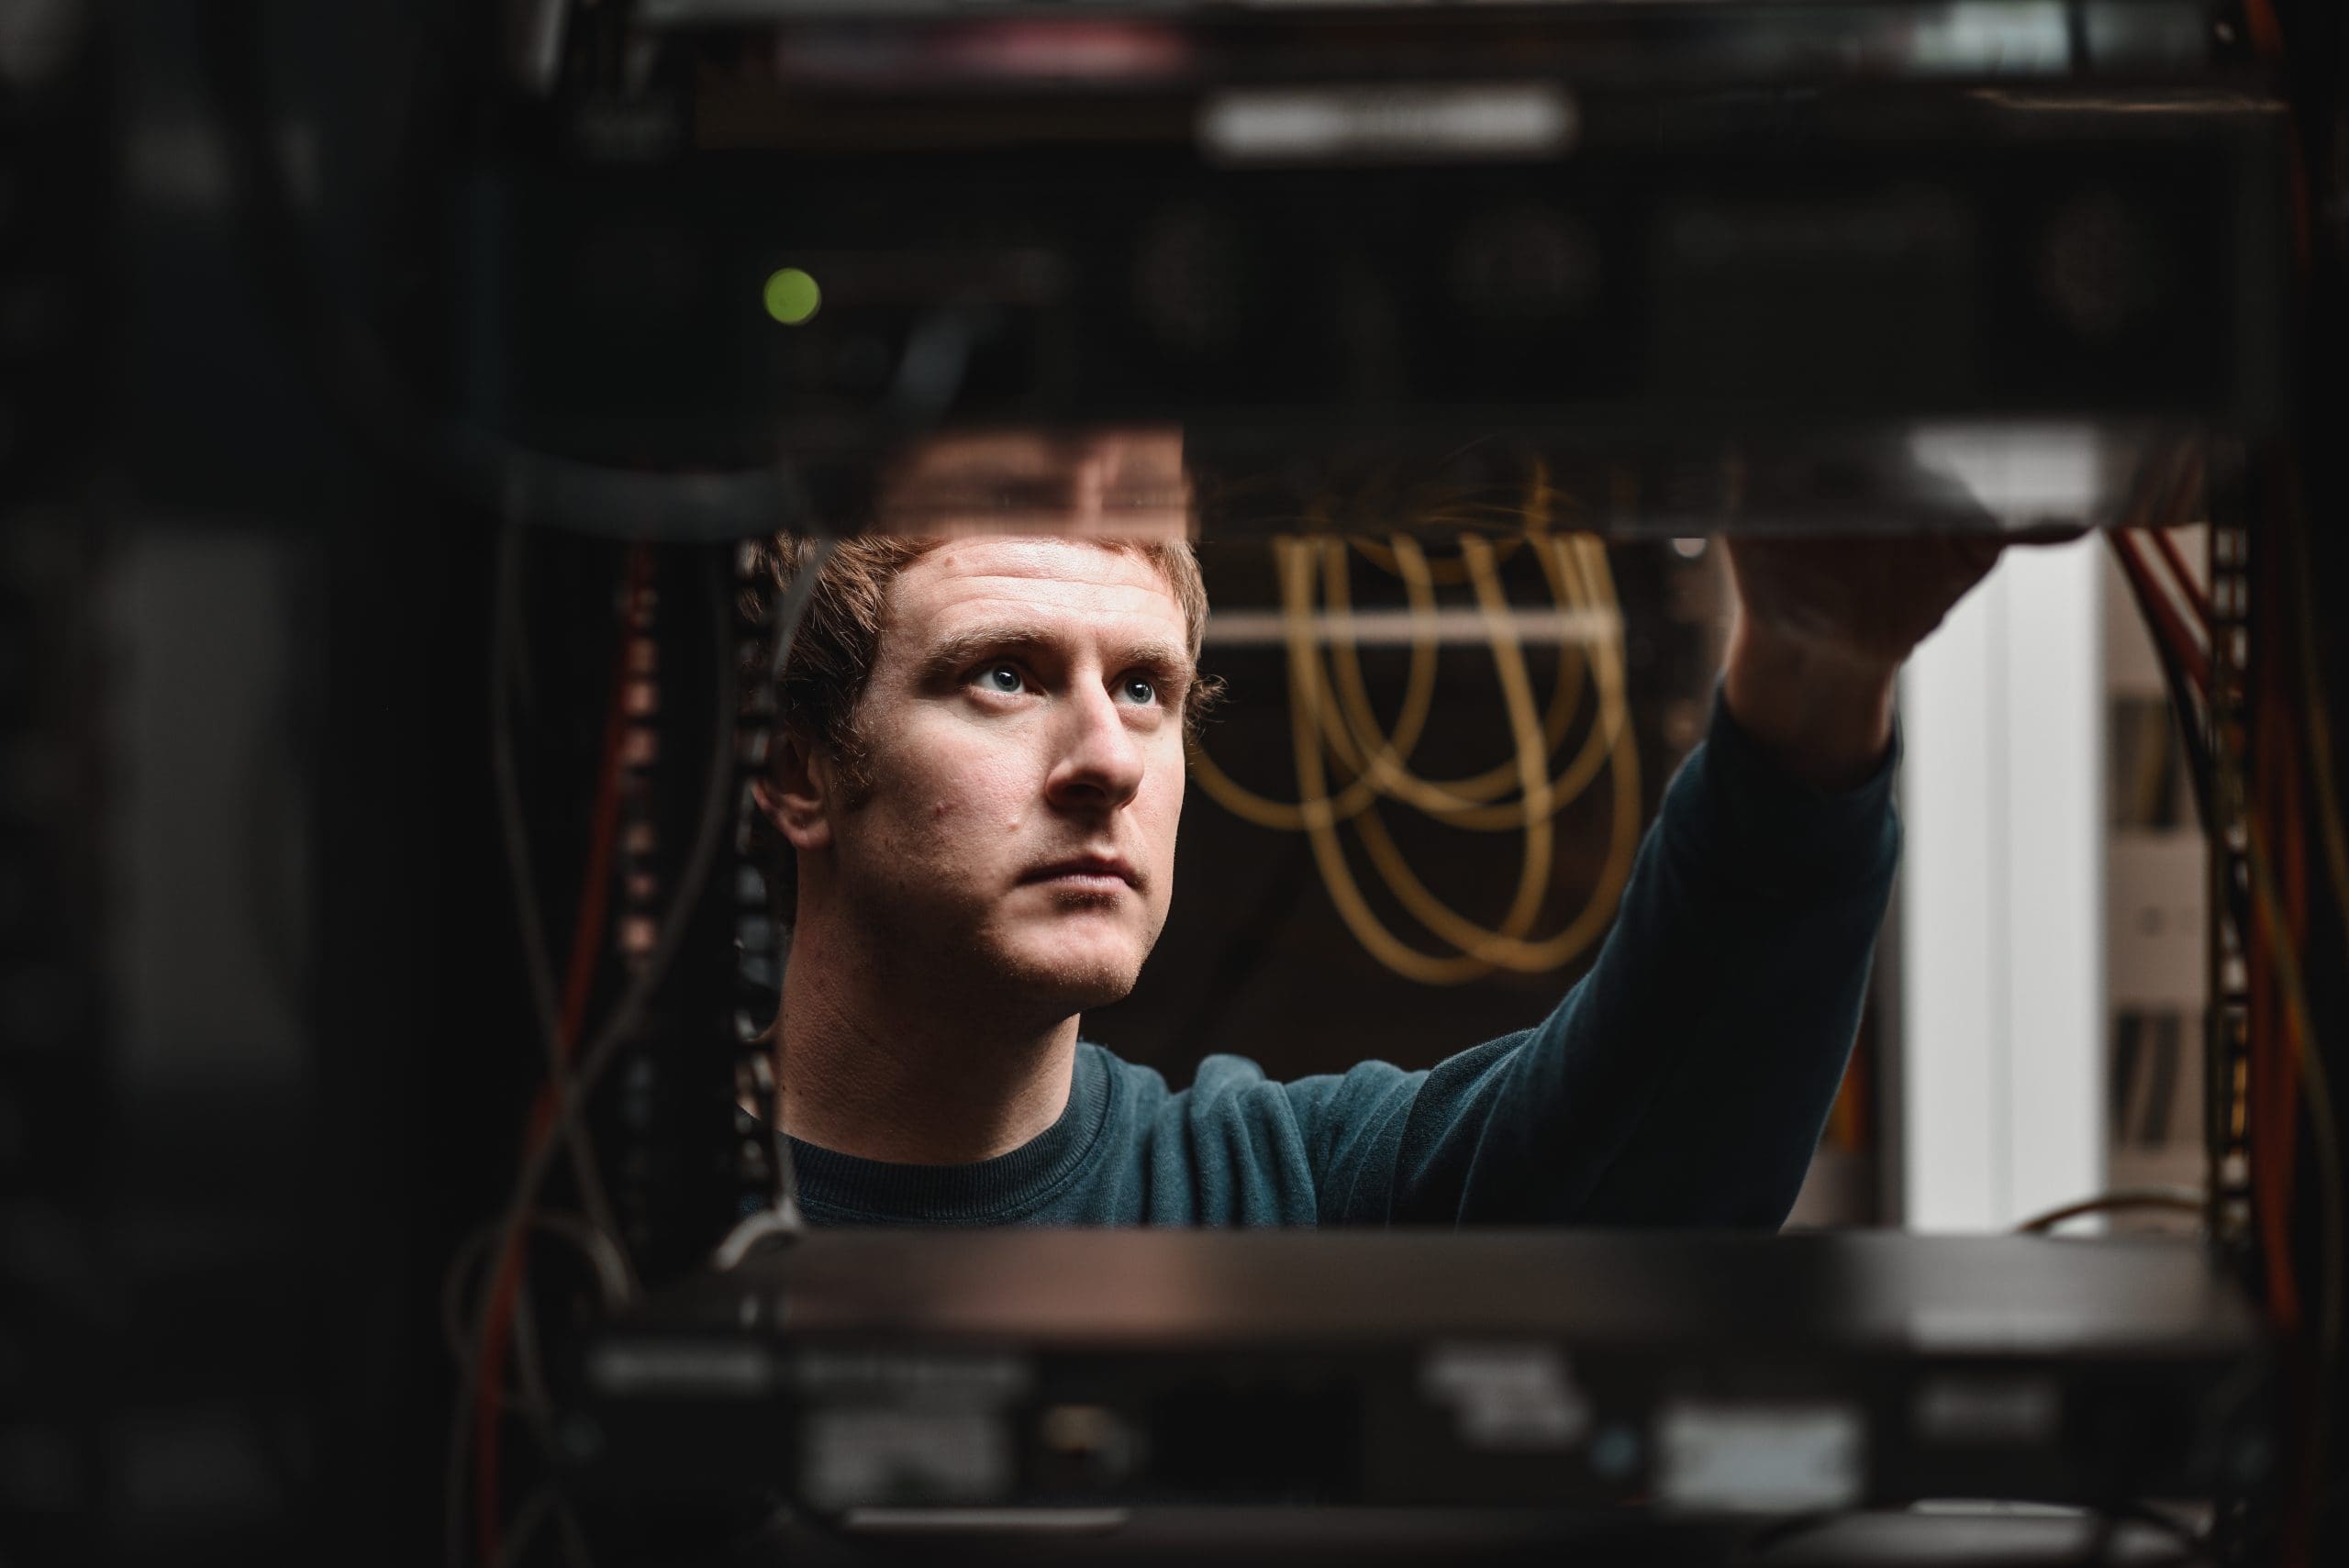 Photograph taken of Cantium employee through a server rack while they are performing maintenance and routine checks.